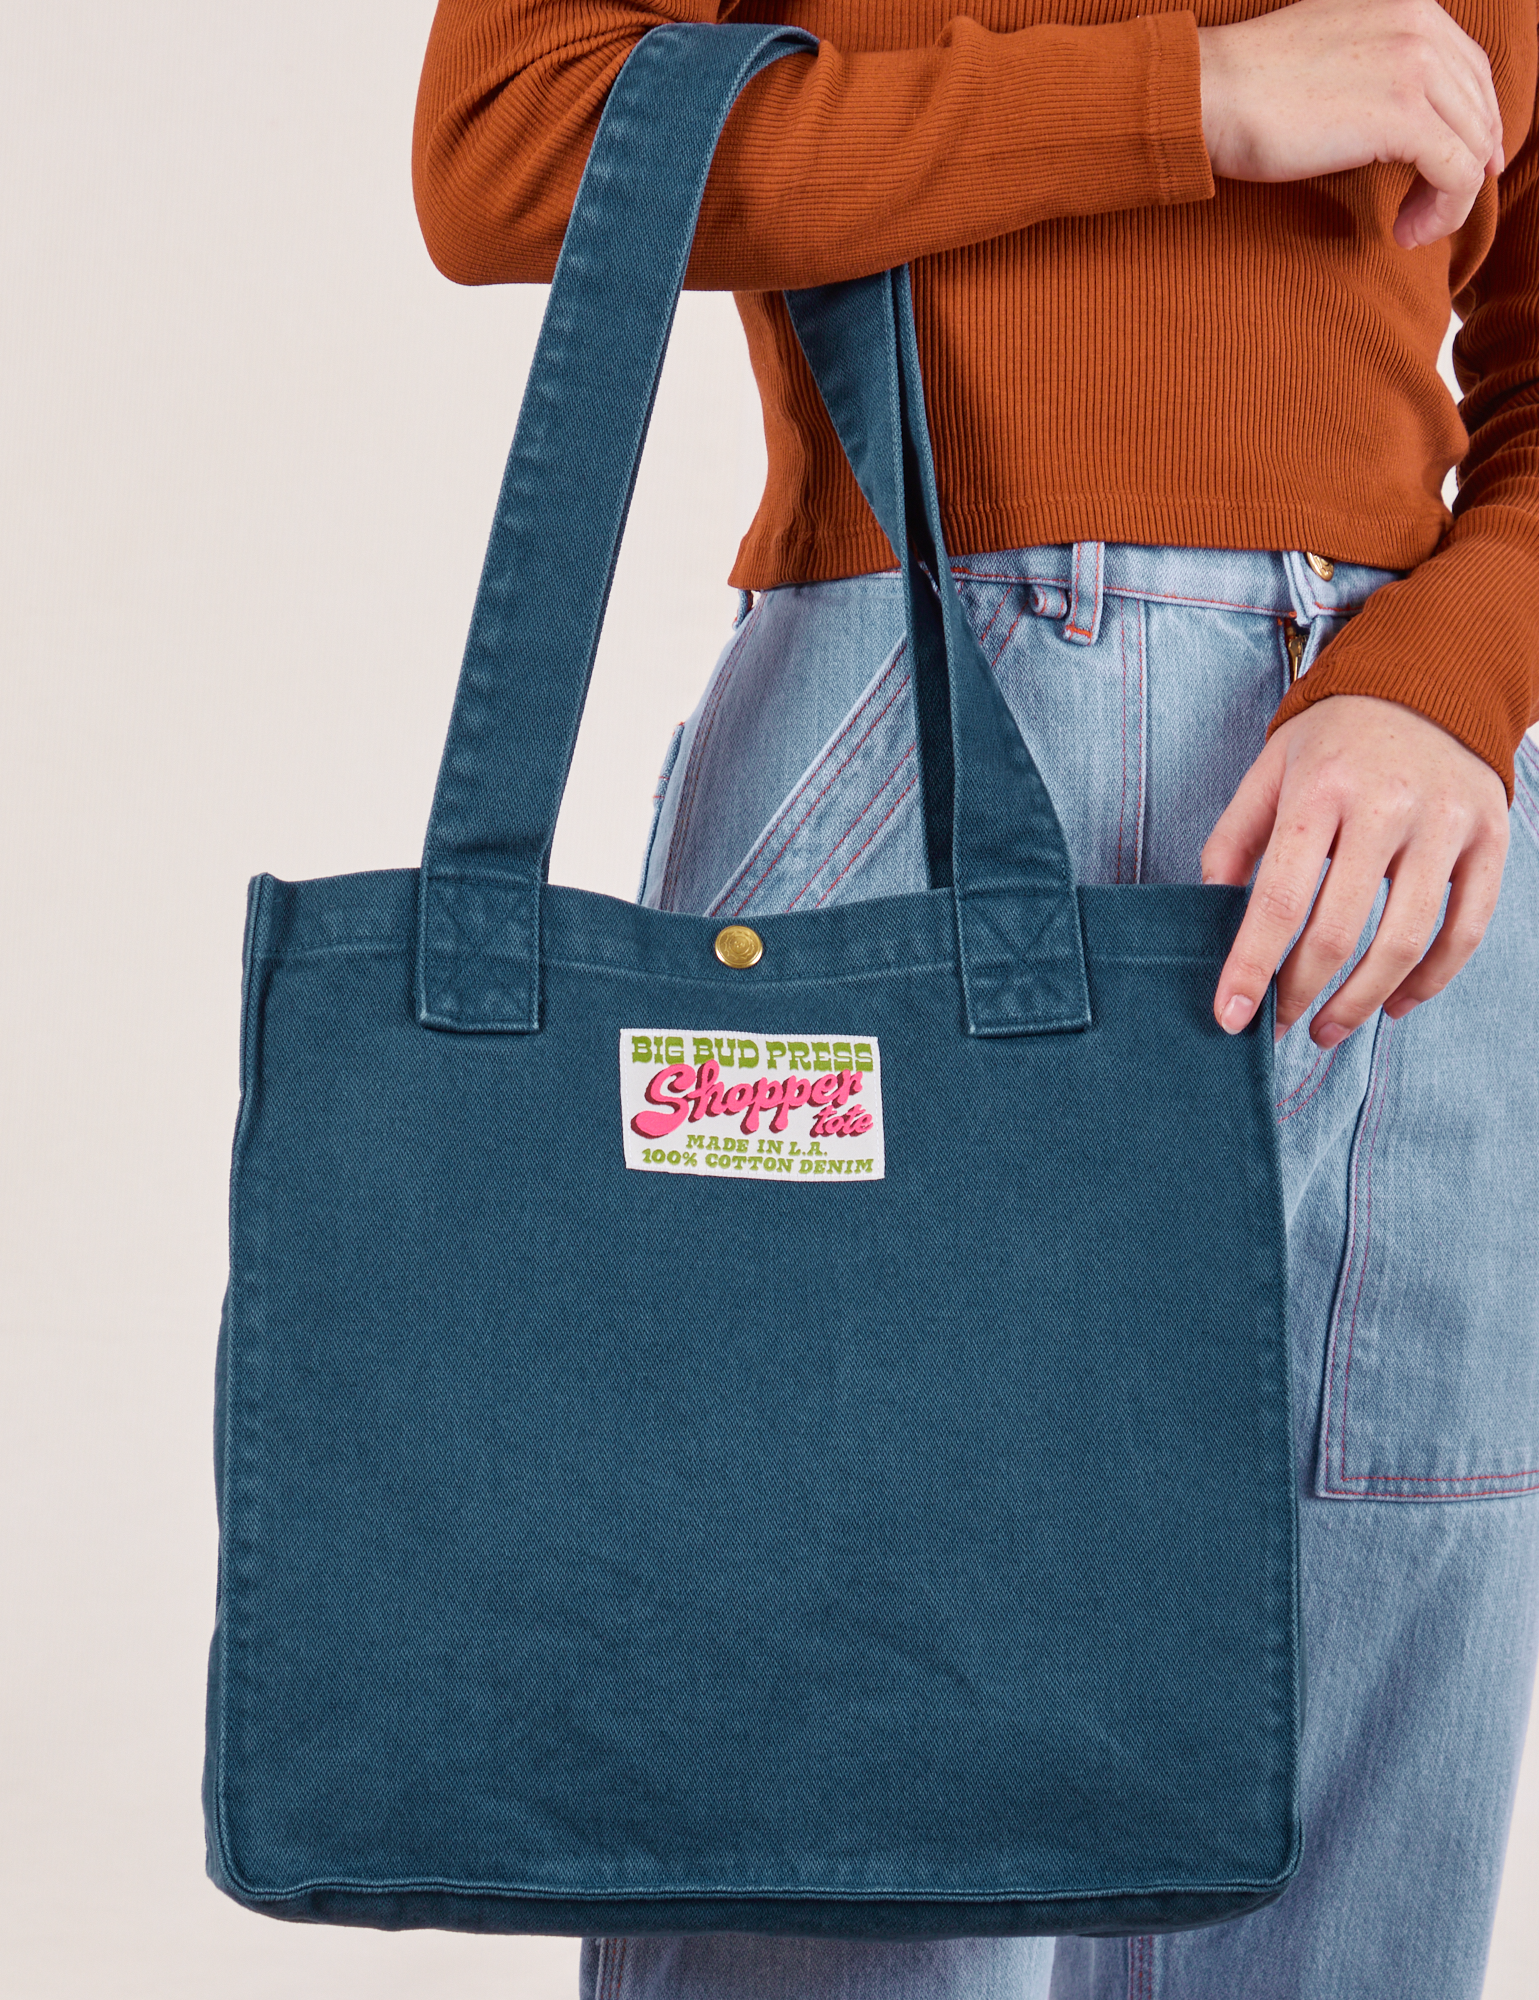 Shopper Tote Bag in Lagoon worn off arm of model